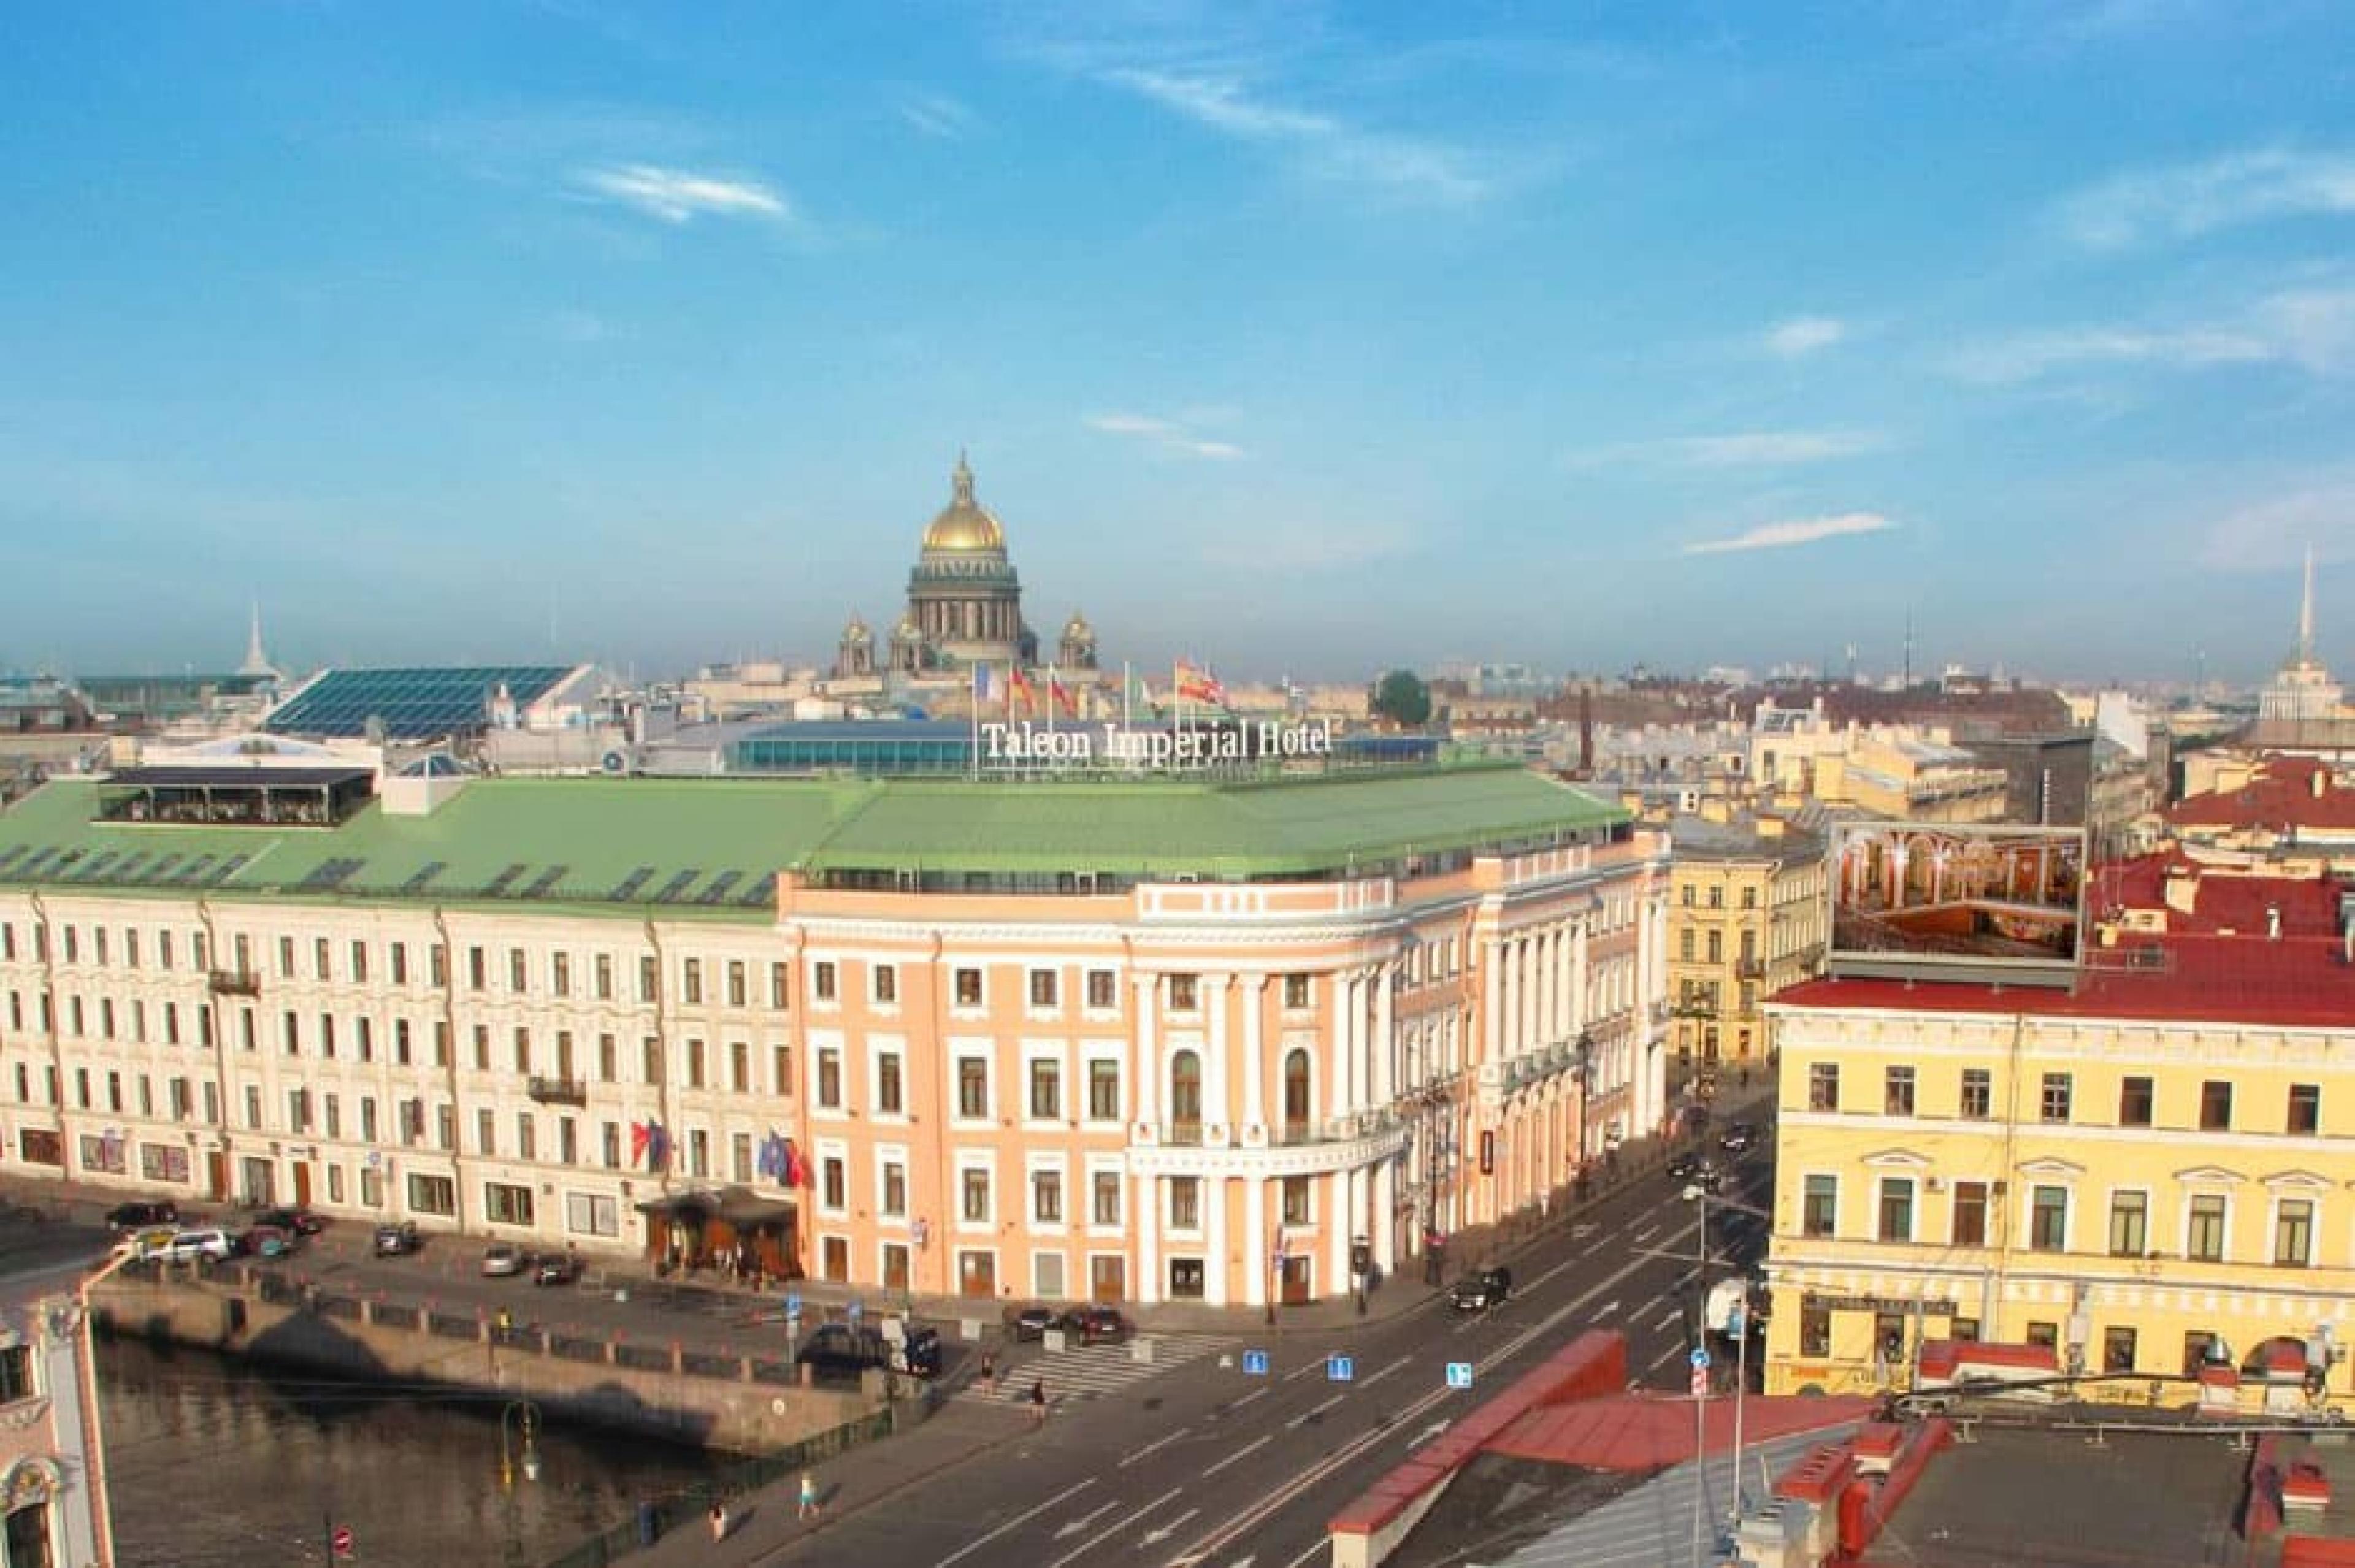 Aerial View : Taleon Imperial Hotel, St. Petersburg, Russia